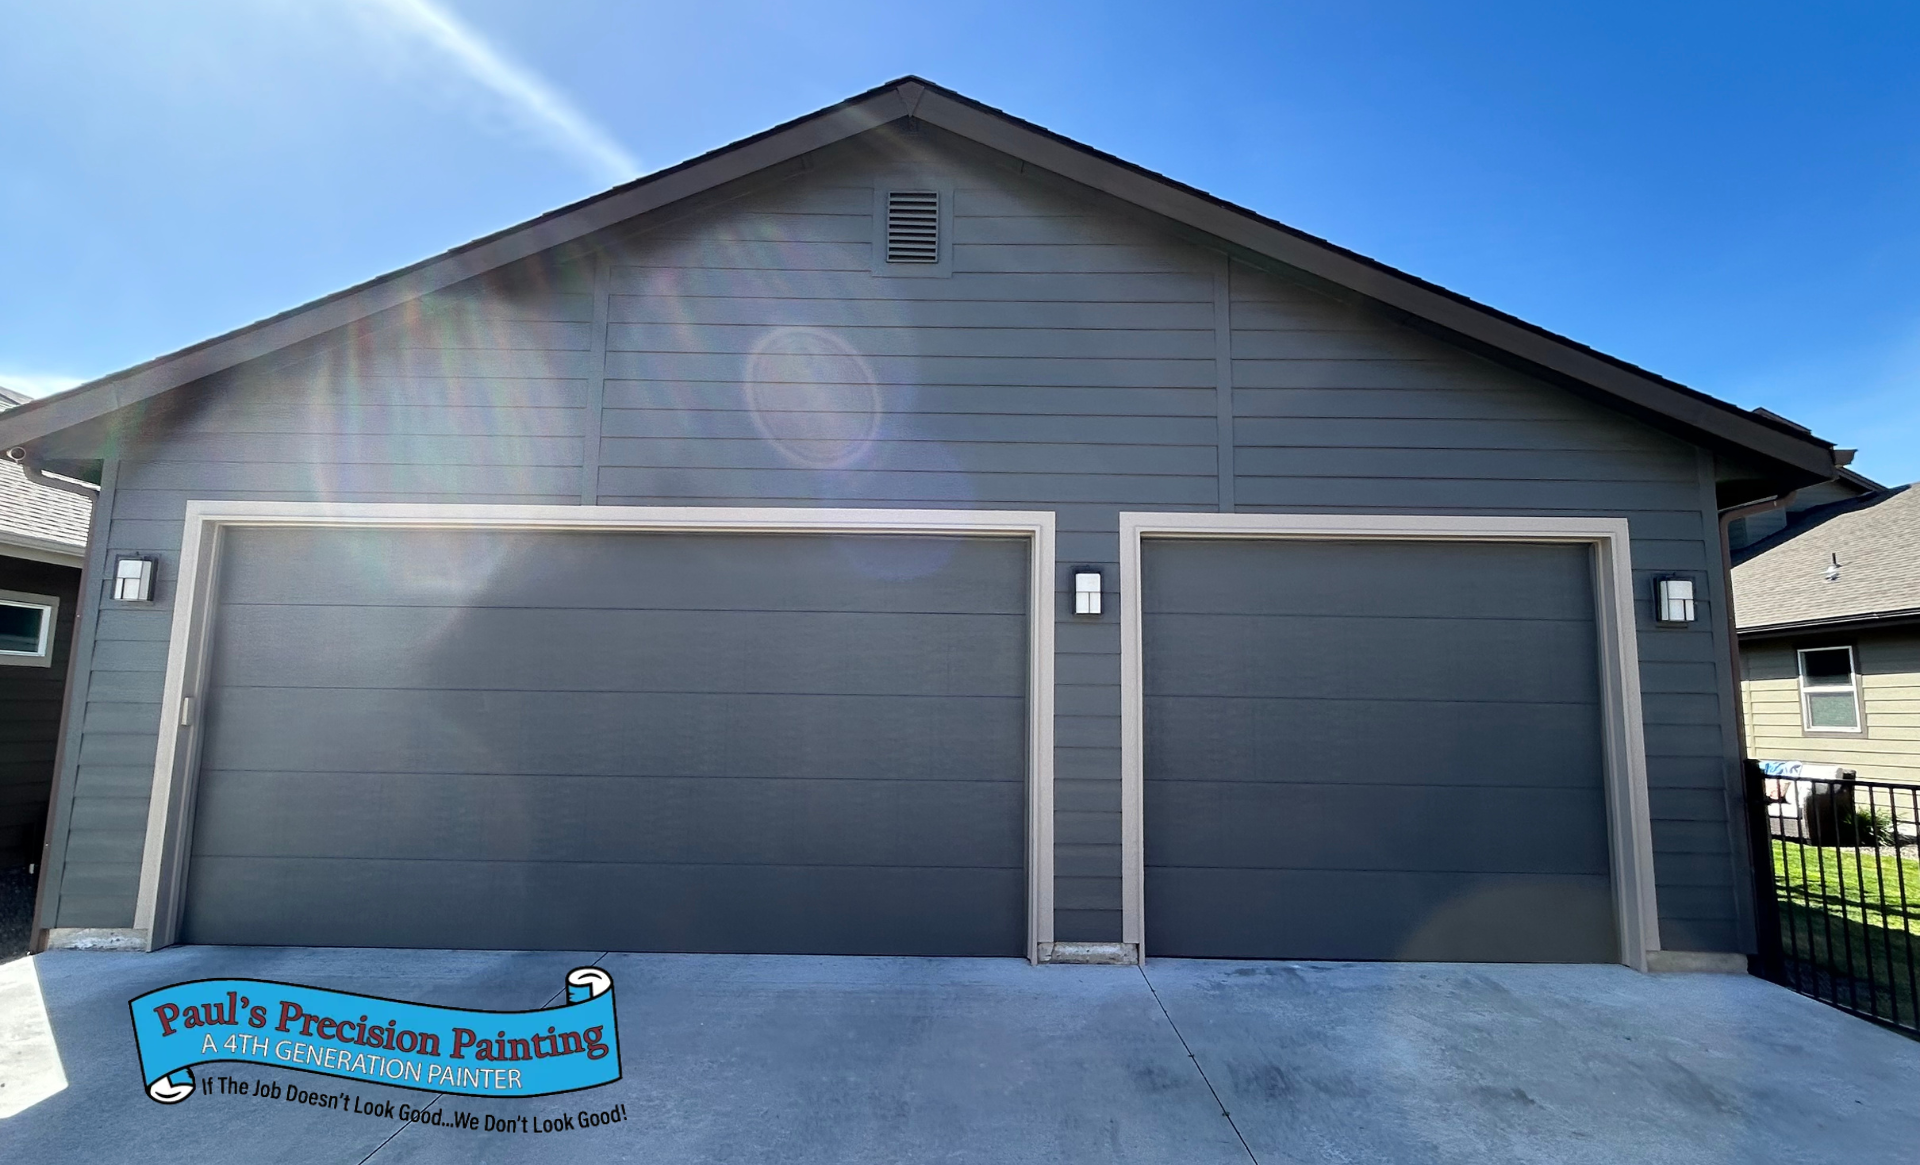 Painting of House Exterior in Boise Idaho - Paul's Precision Painting